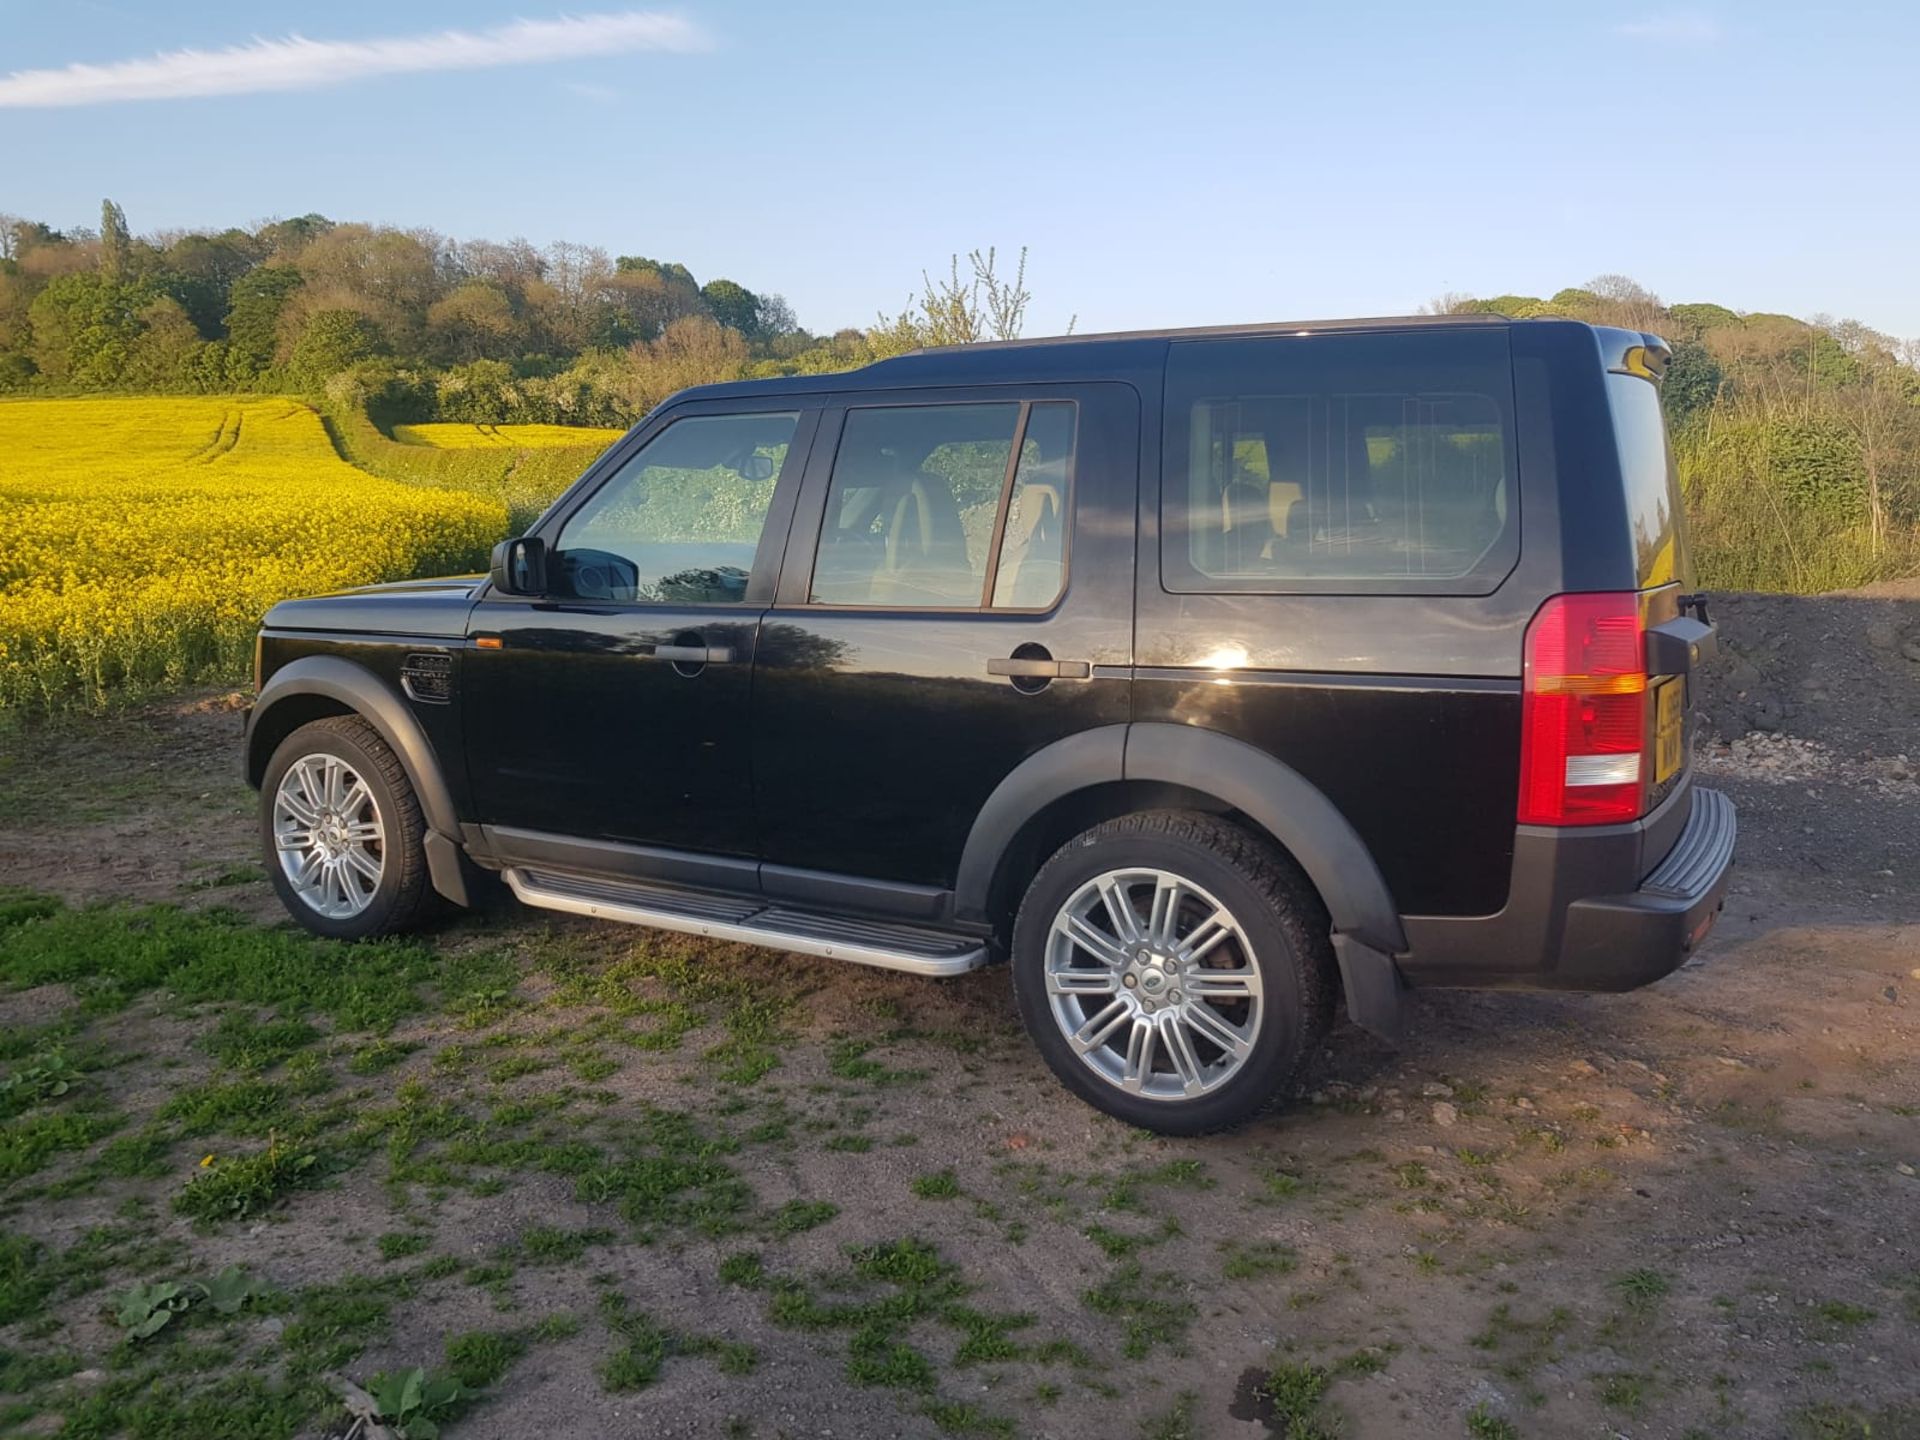 2006/55 REG LAND ROVER DISCOVERY 3 TDV6 AUTO 2.7 DIESEL BLACK 7 SEATER *NO VAT* - Image 4 of 12